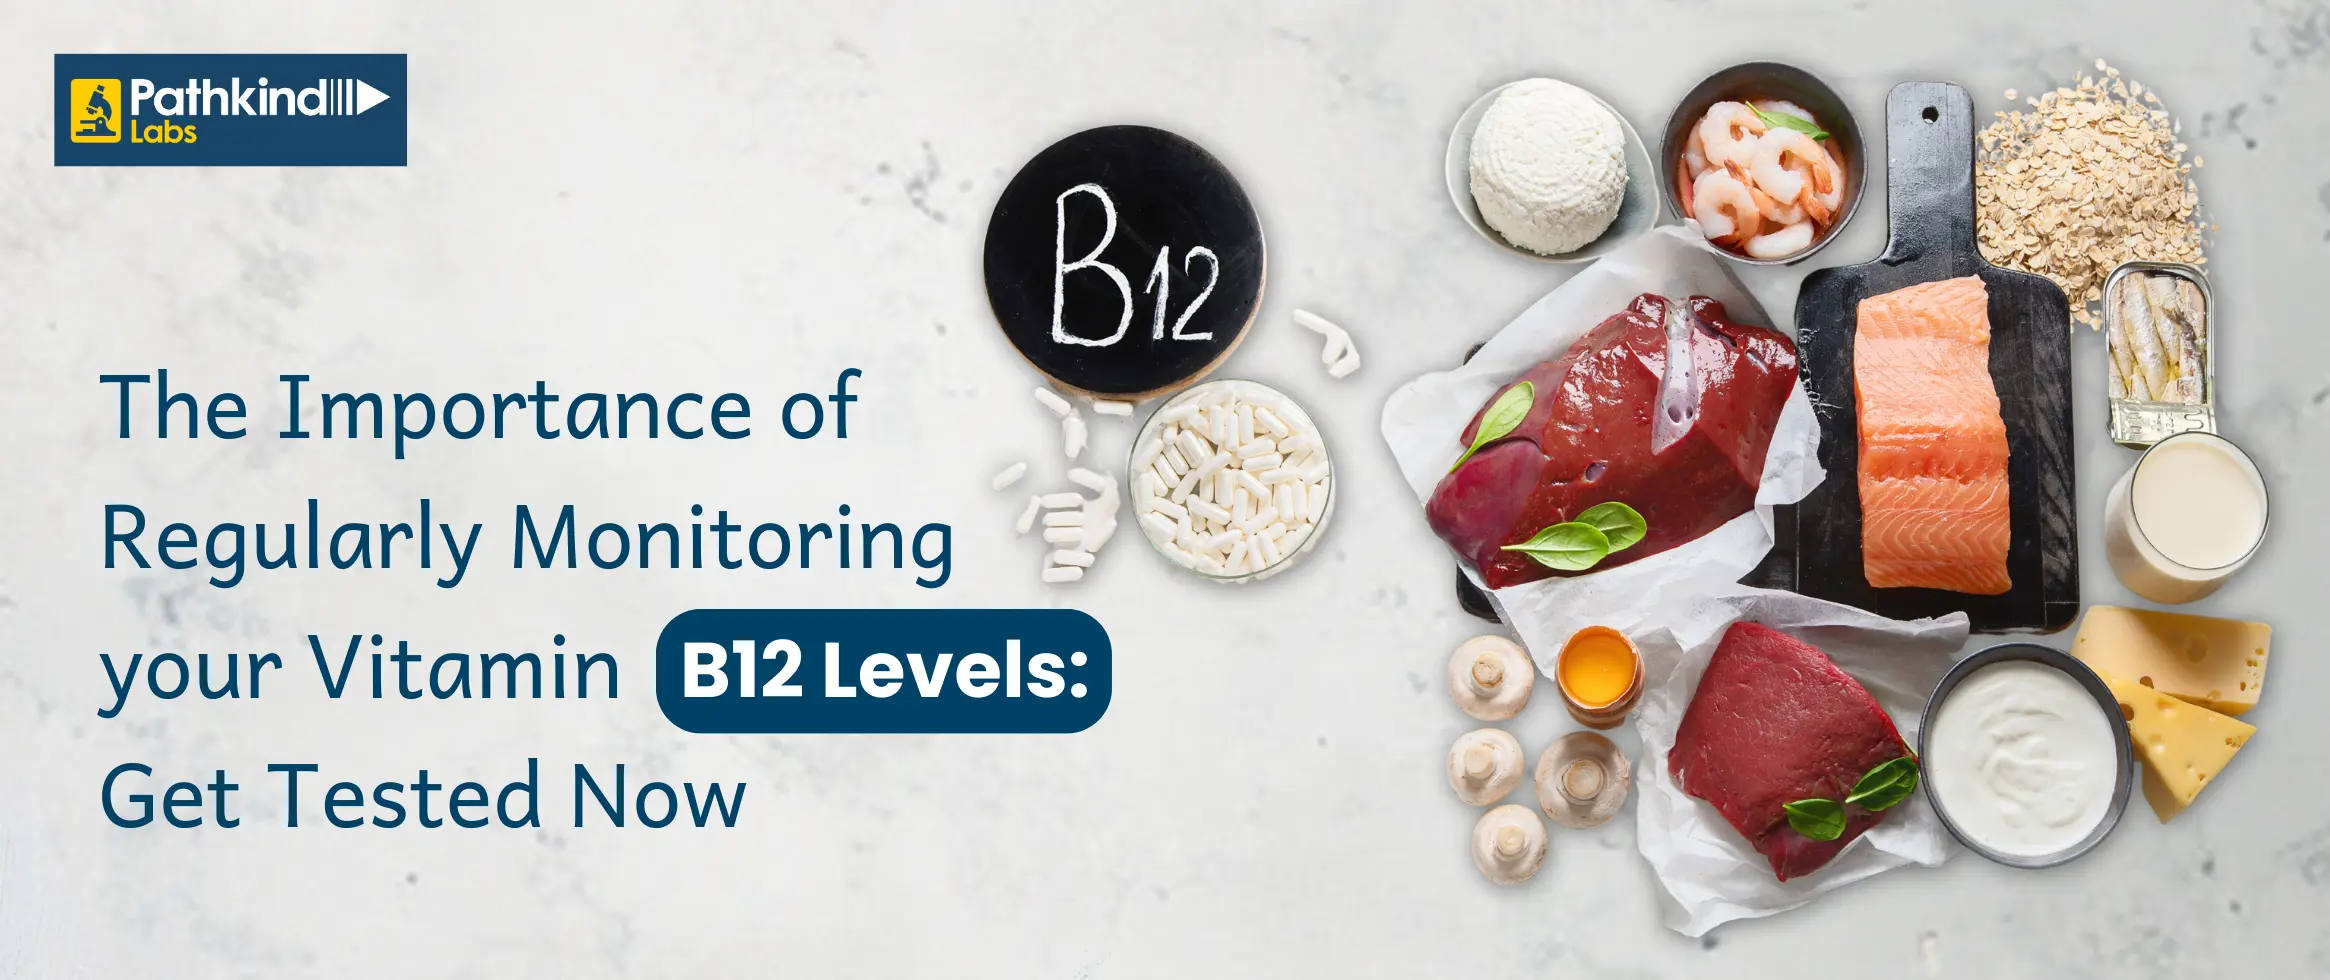  The Importance of Regularly Monitoring Your Vitamin B12 Levels: Get Te...